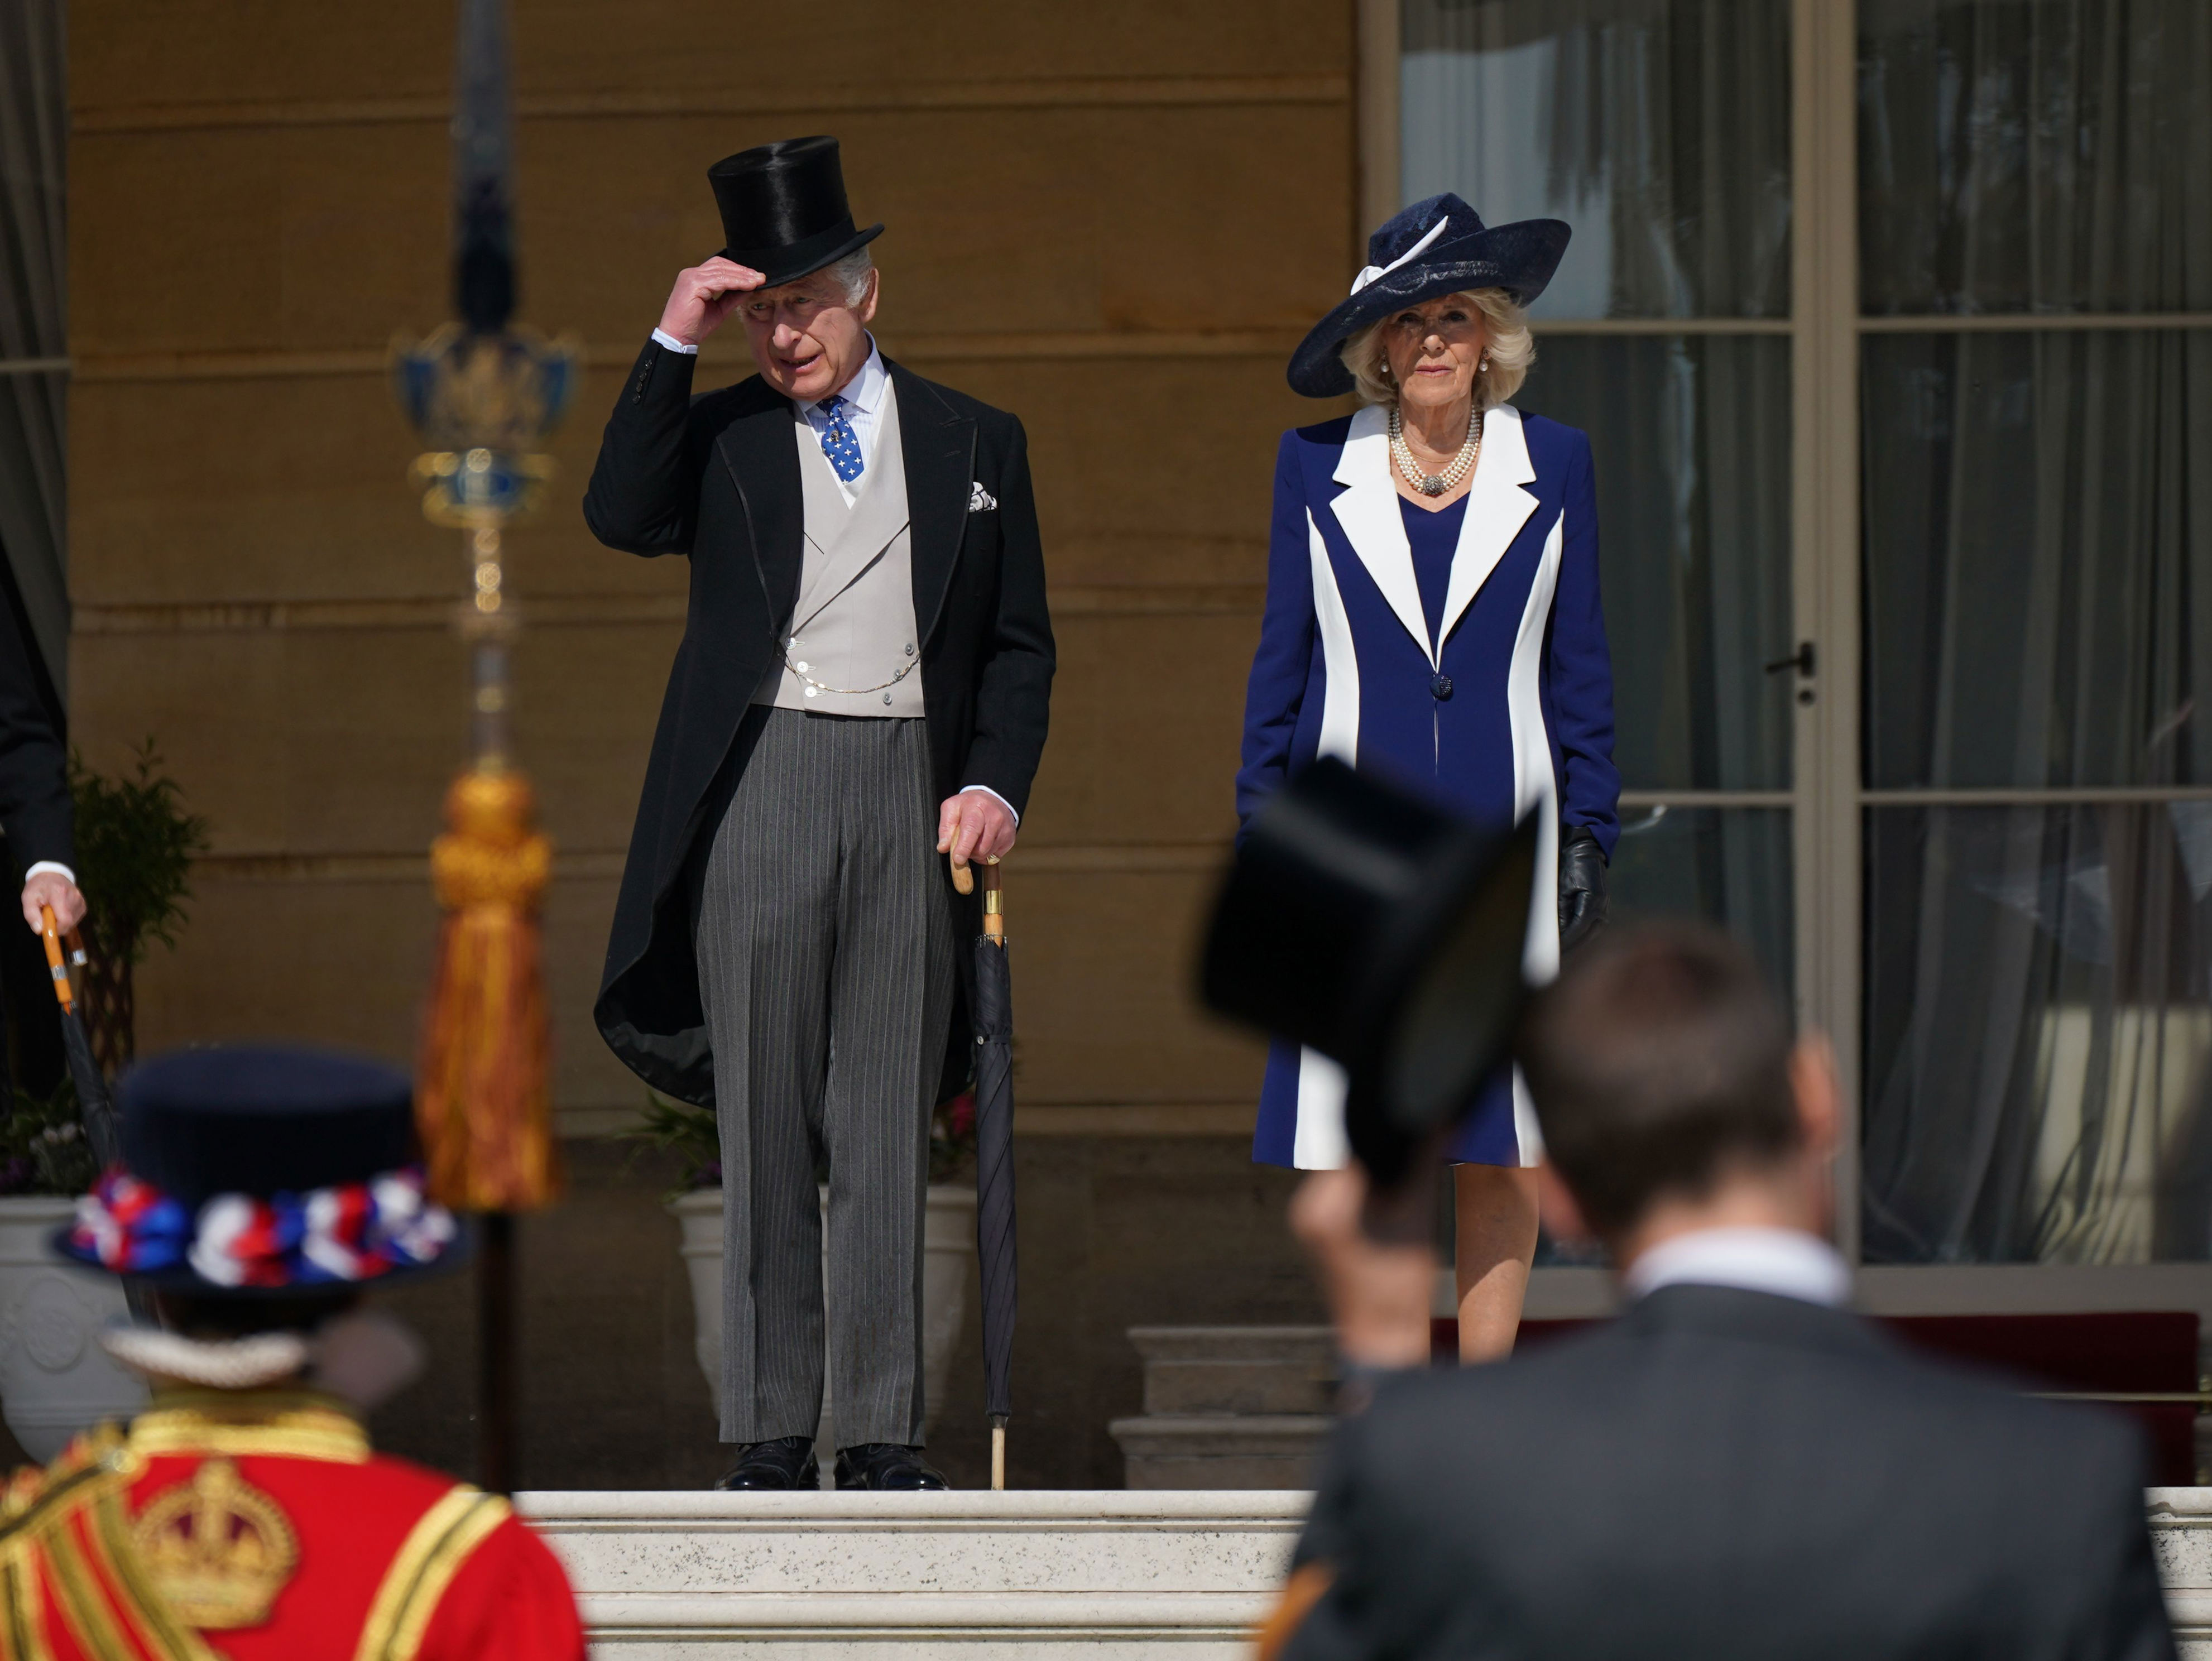 <p>King Charles III and Queen Consort Camilla arrived at a Buckingham Palace garden party in London on May 3, 2023, in celebration of their upcoming coronation.</p>